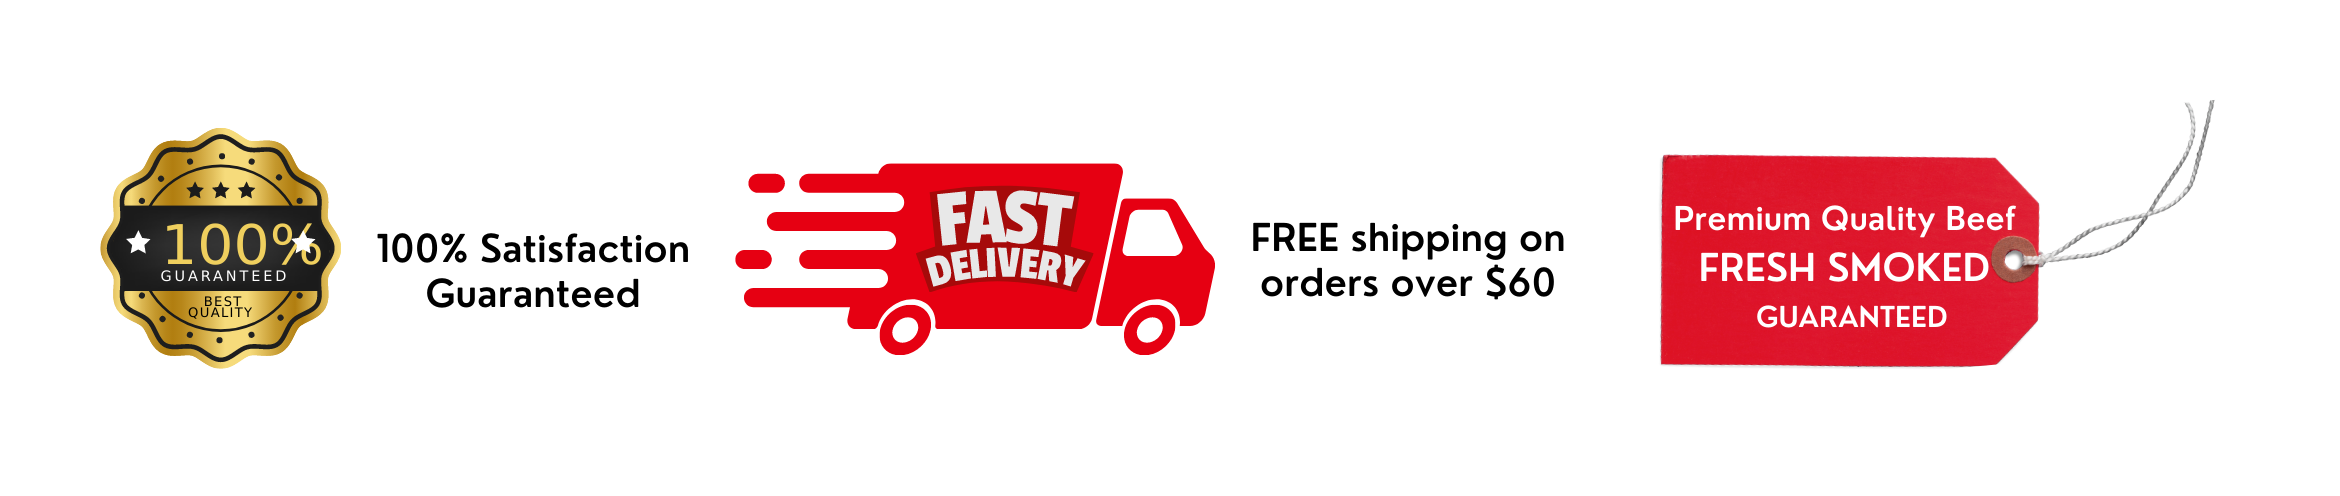 Free shipping on orders over $60